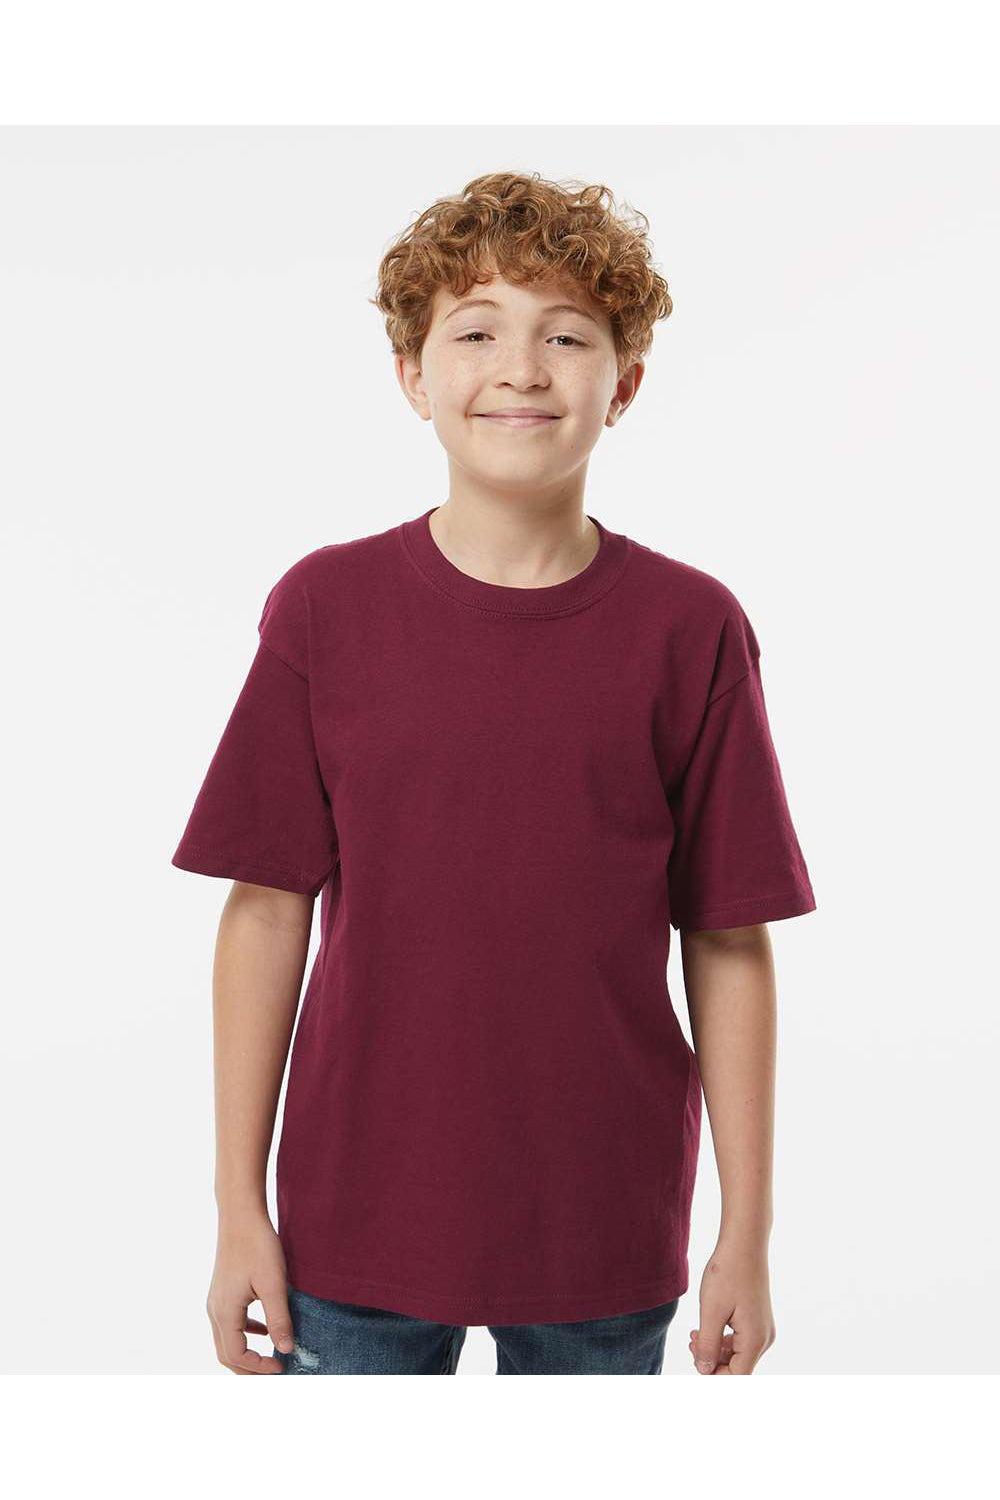 M&O 4850 Youth Gold Soft Touch Short Sleeve Crewneck T-Shirt Maroon Model Front